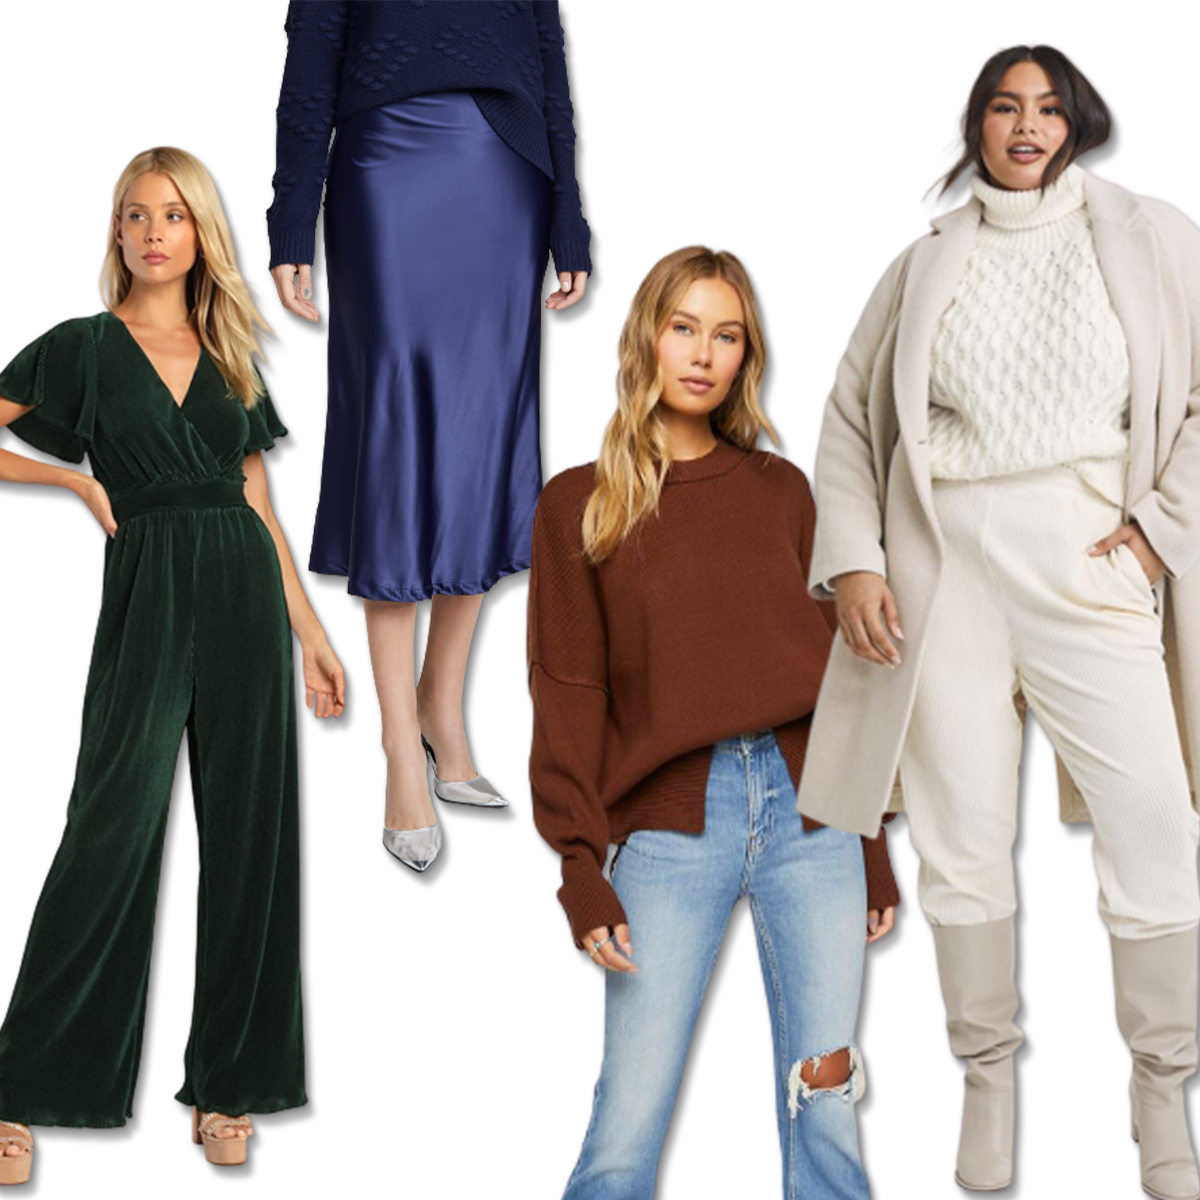 15 Thanksgiving Outfit Ideas That Will Serve at the Dinner Table